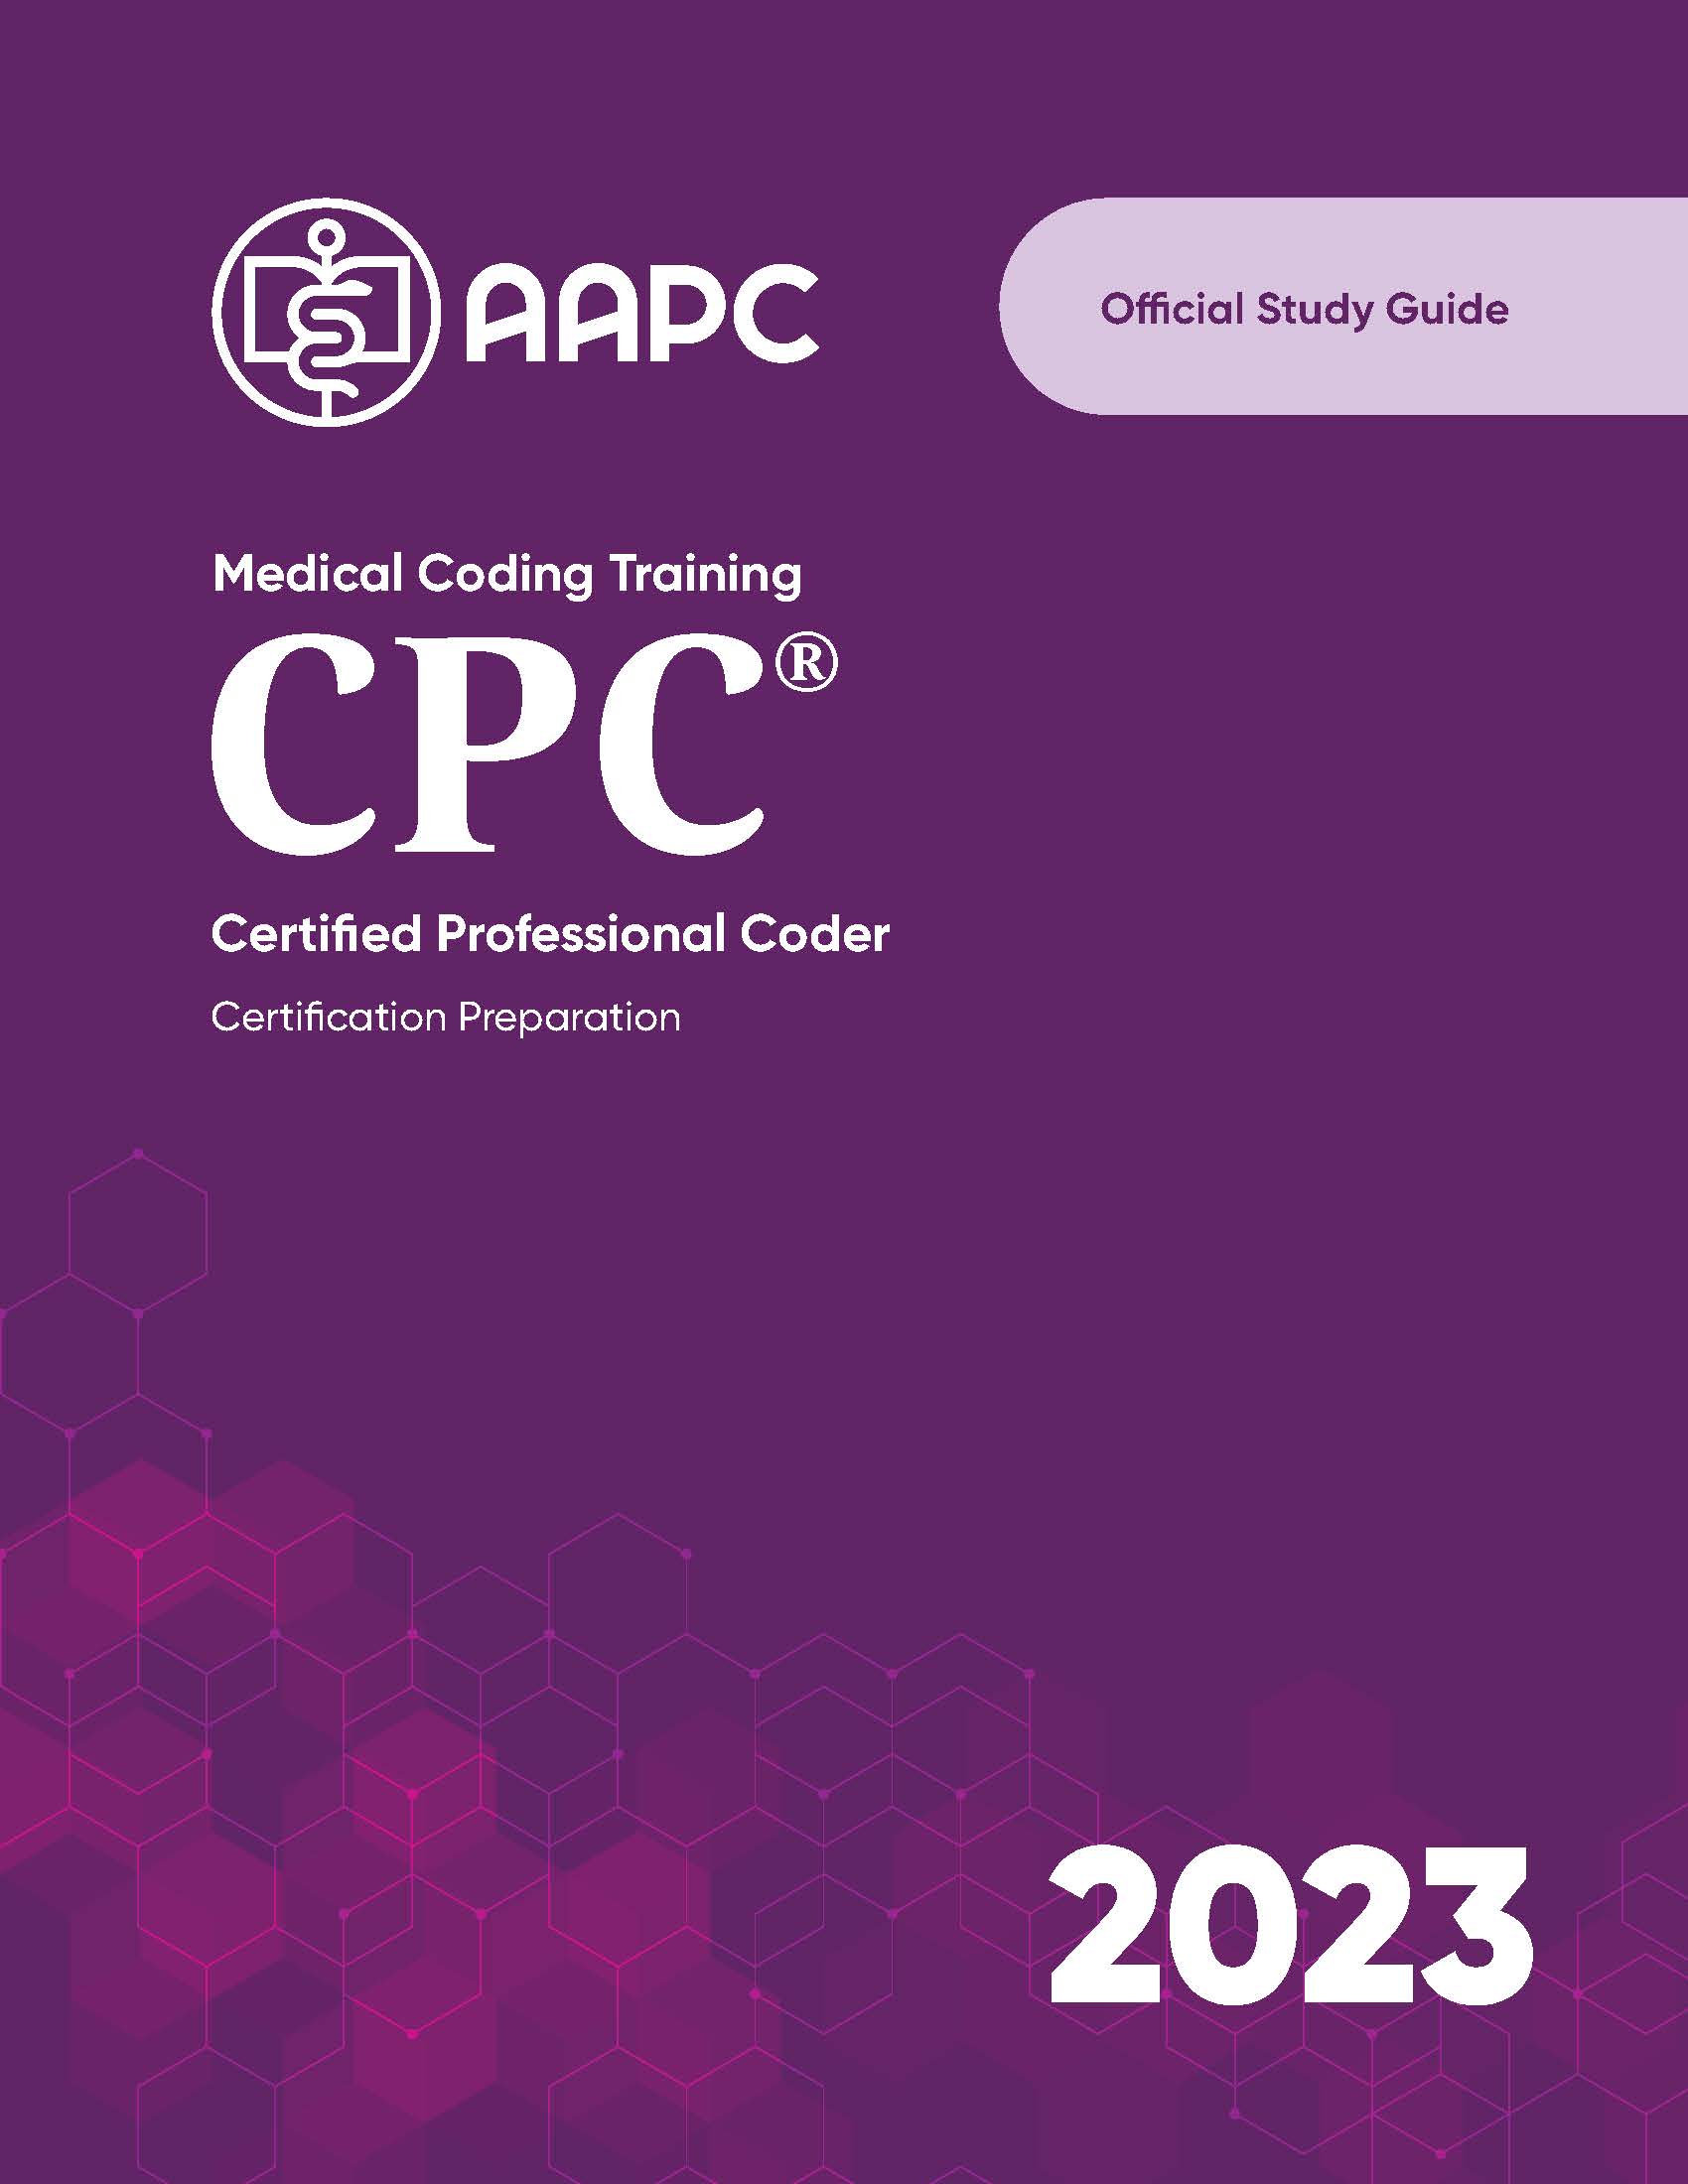 AAPC Study Guide Legacy Medical Billing & Coding Website